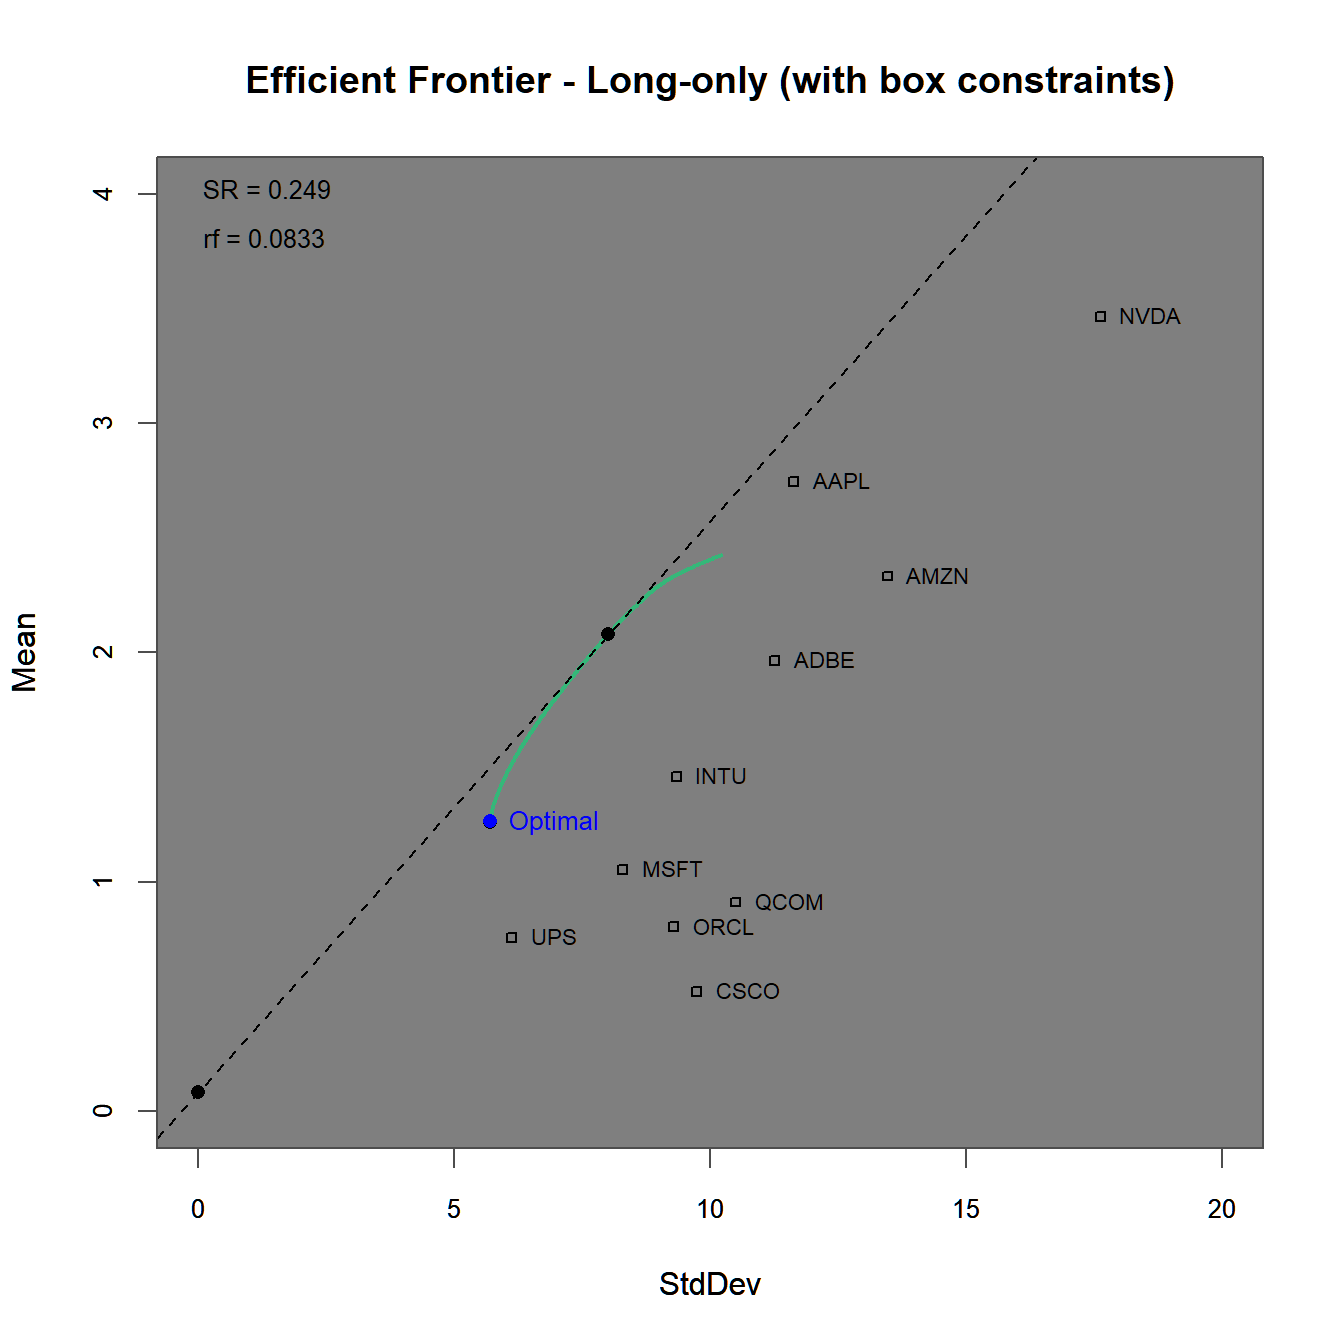 Efficient frontier and optimal portfolios for the using a long-only as well as a box constraint.